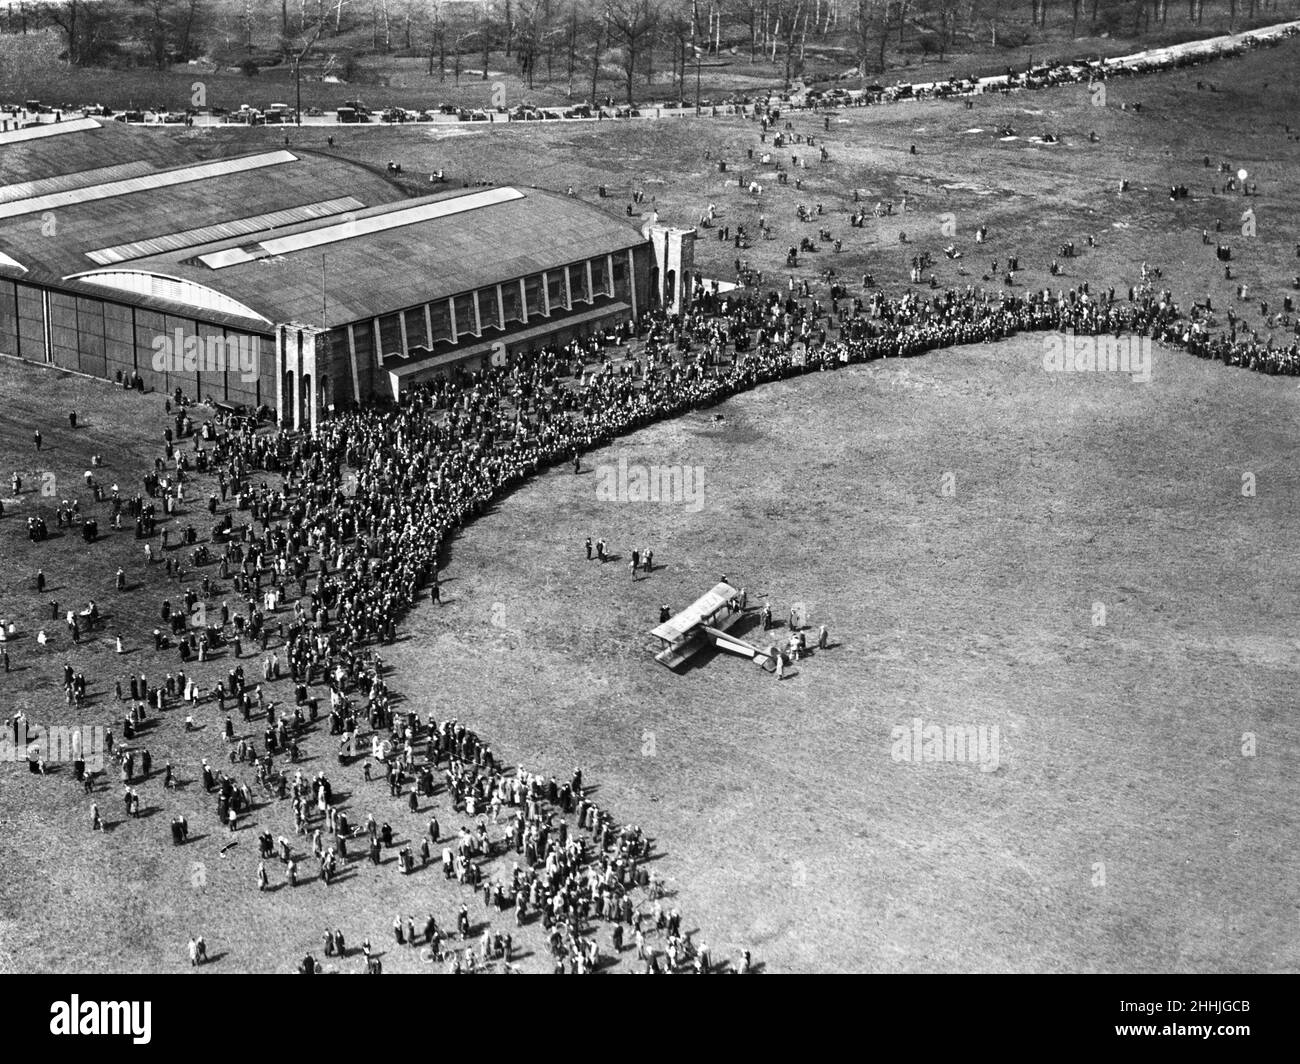 An Avro 504K three seater bi plane draws a huge crowds as it makes a landing at Alexandra Park Aerodrome in Manchester.June 1920. Stock Photo